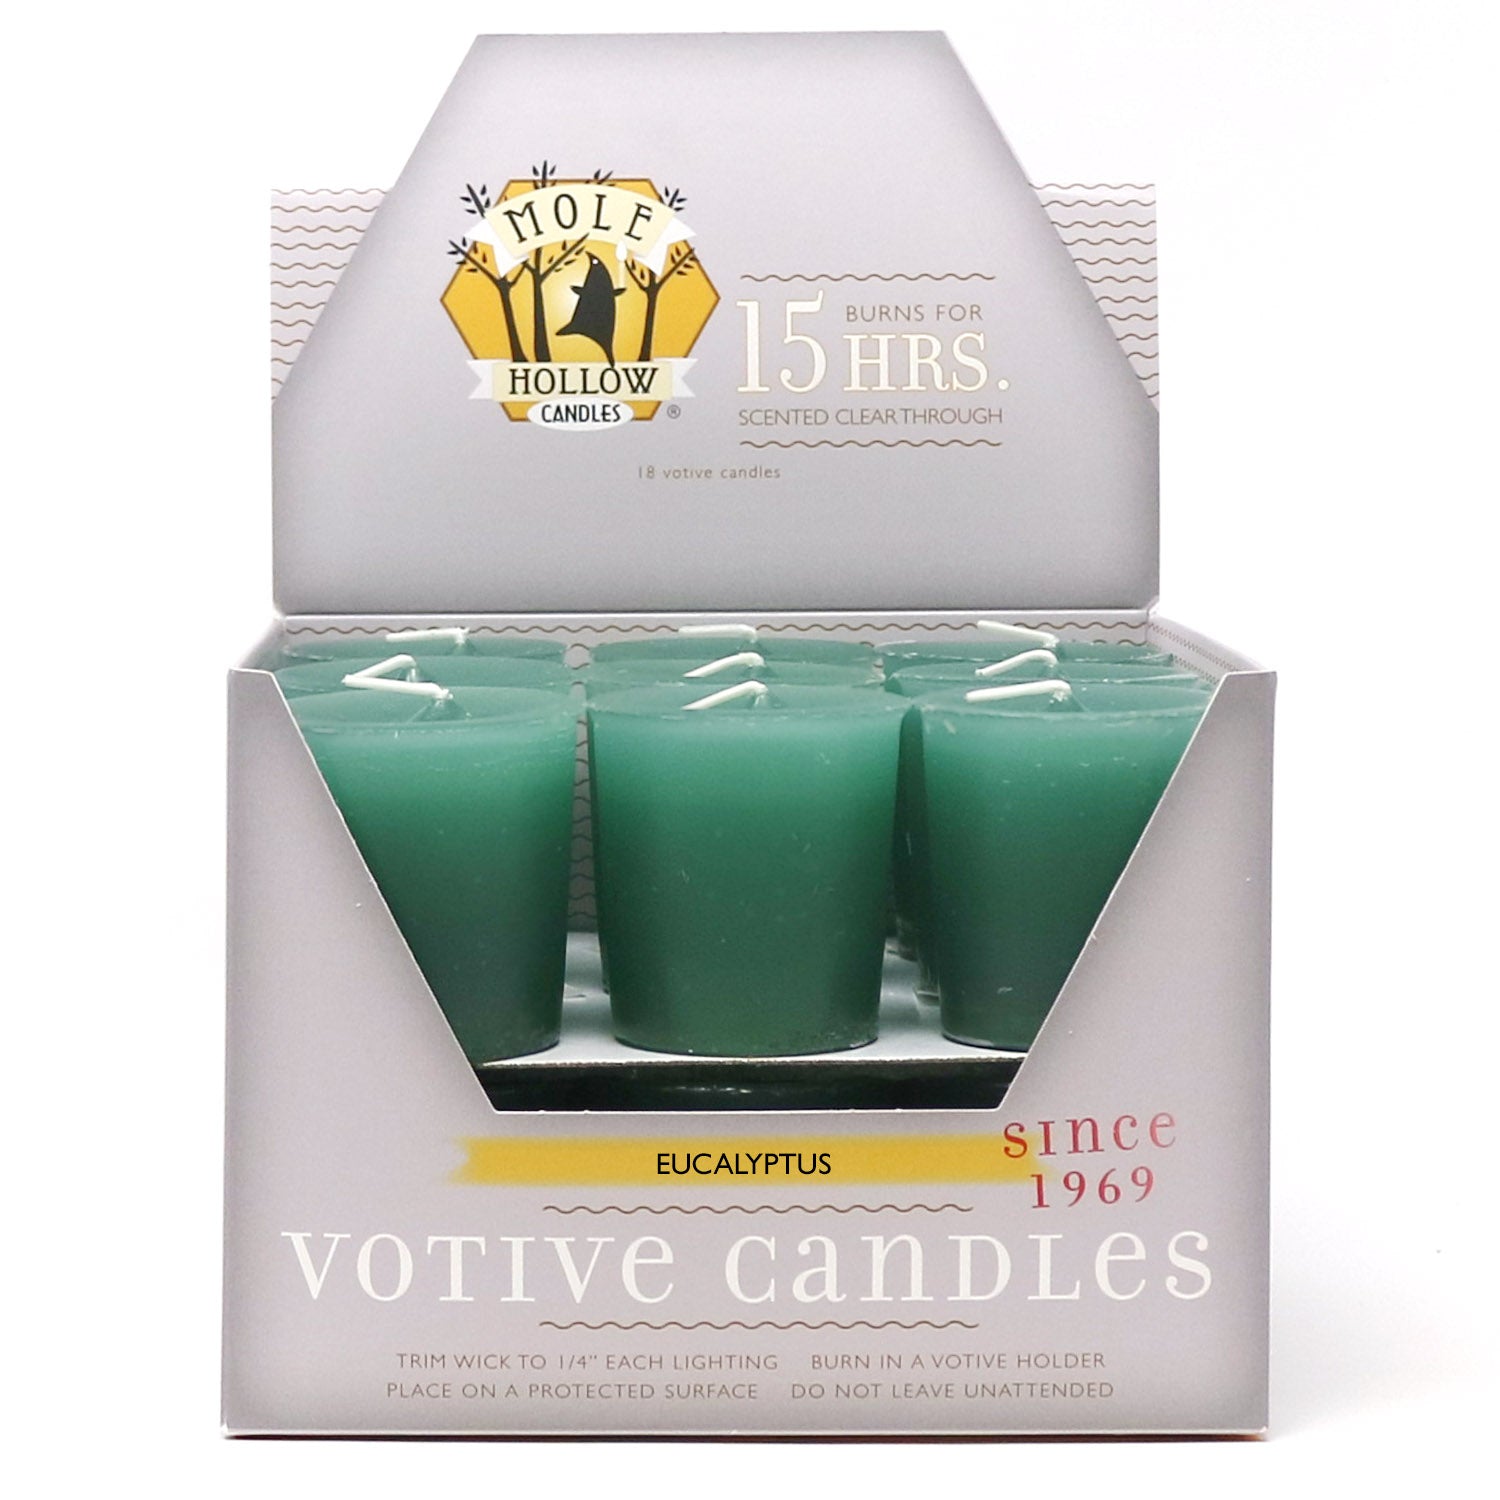 Eucalyptus scented votive candles, box of 18